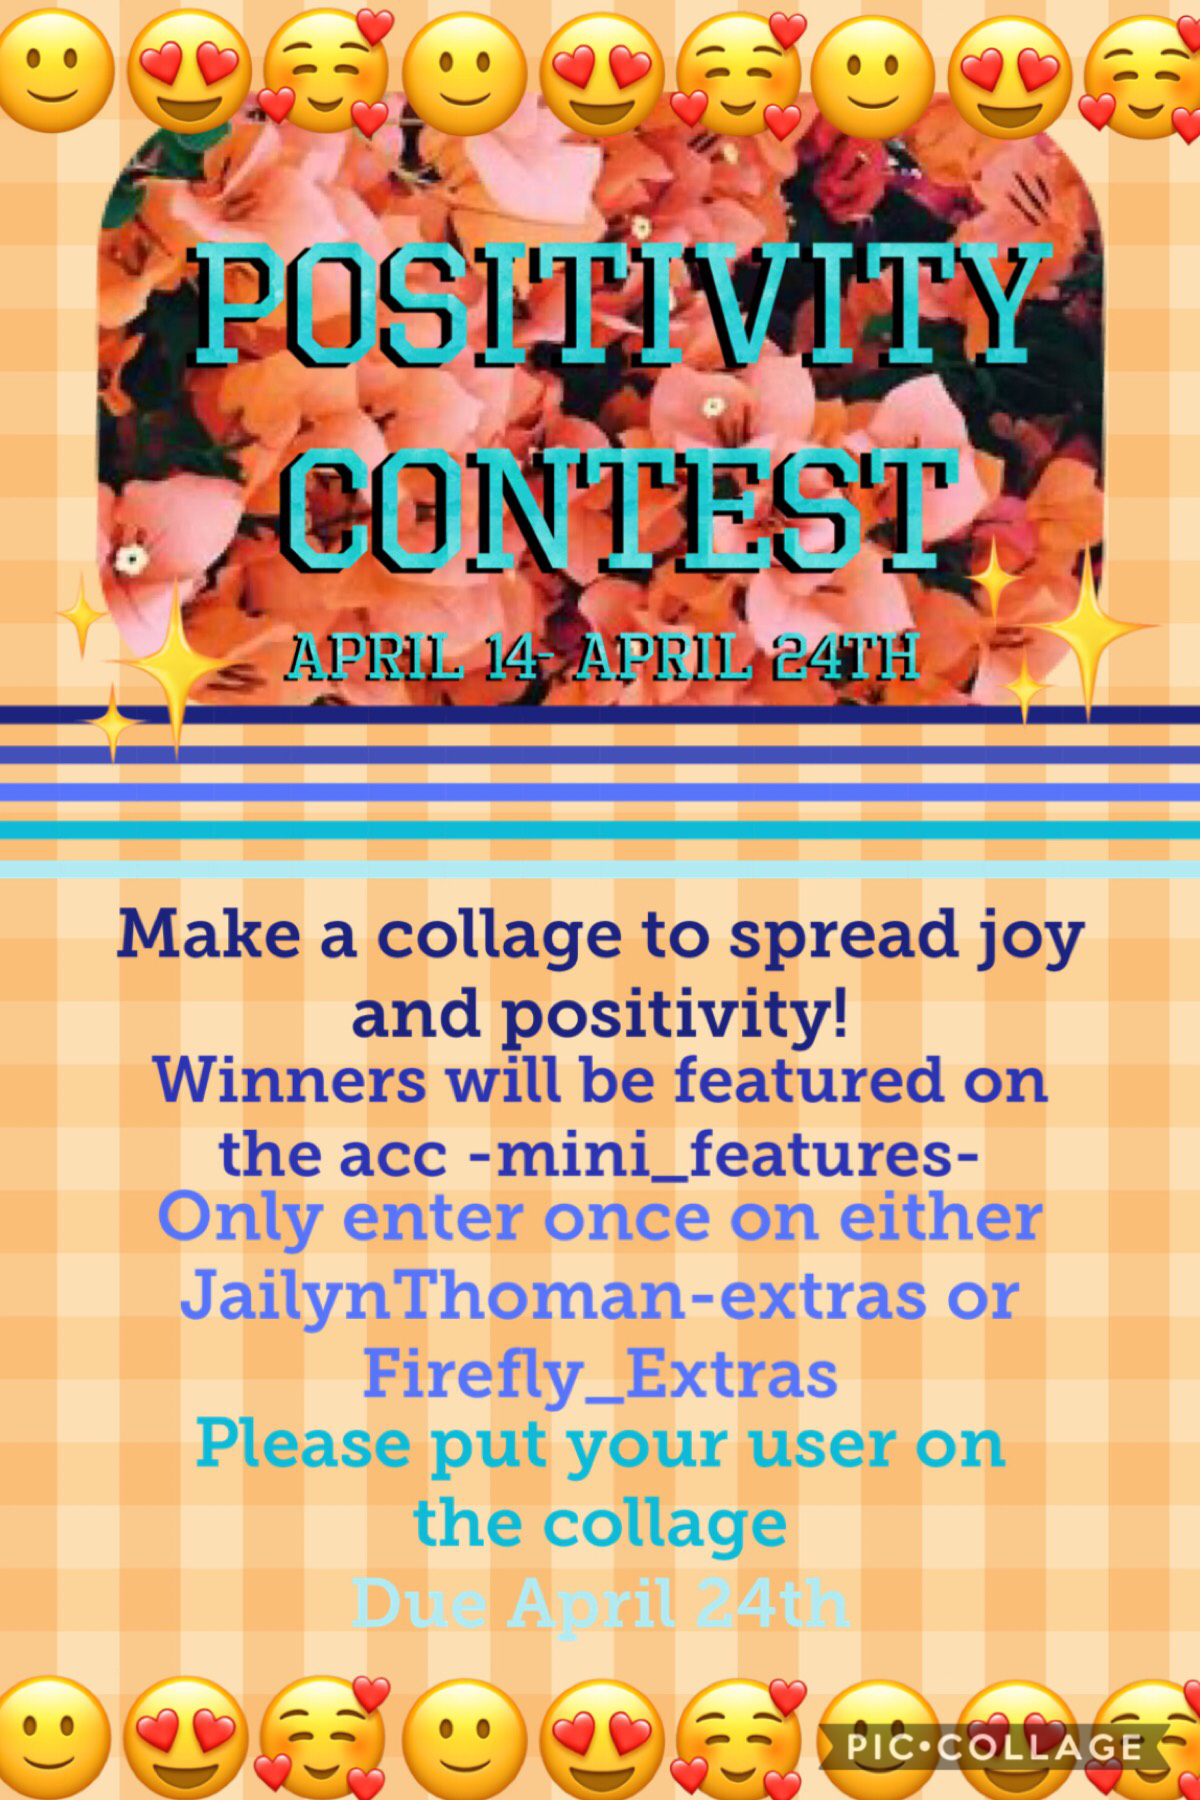 ⭐️TAP⭐️
This was a contest collab with Dancing_Fireflies! Please enter your collage by April 24th!